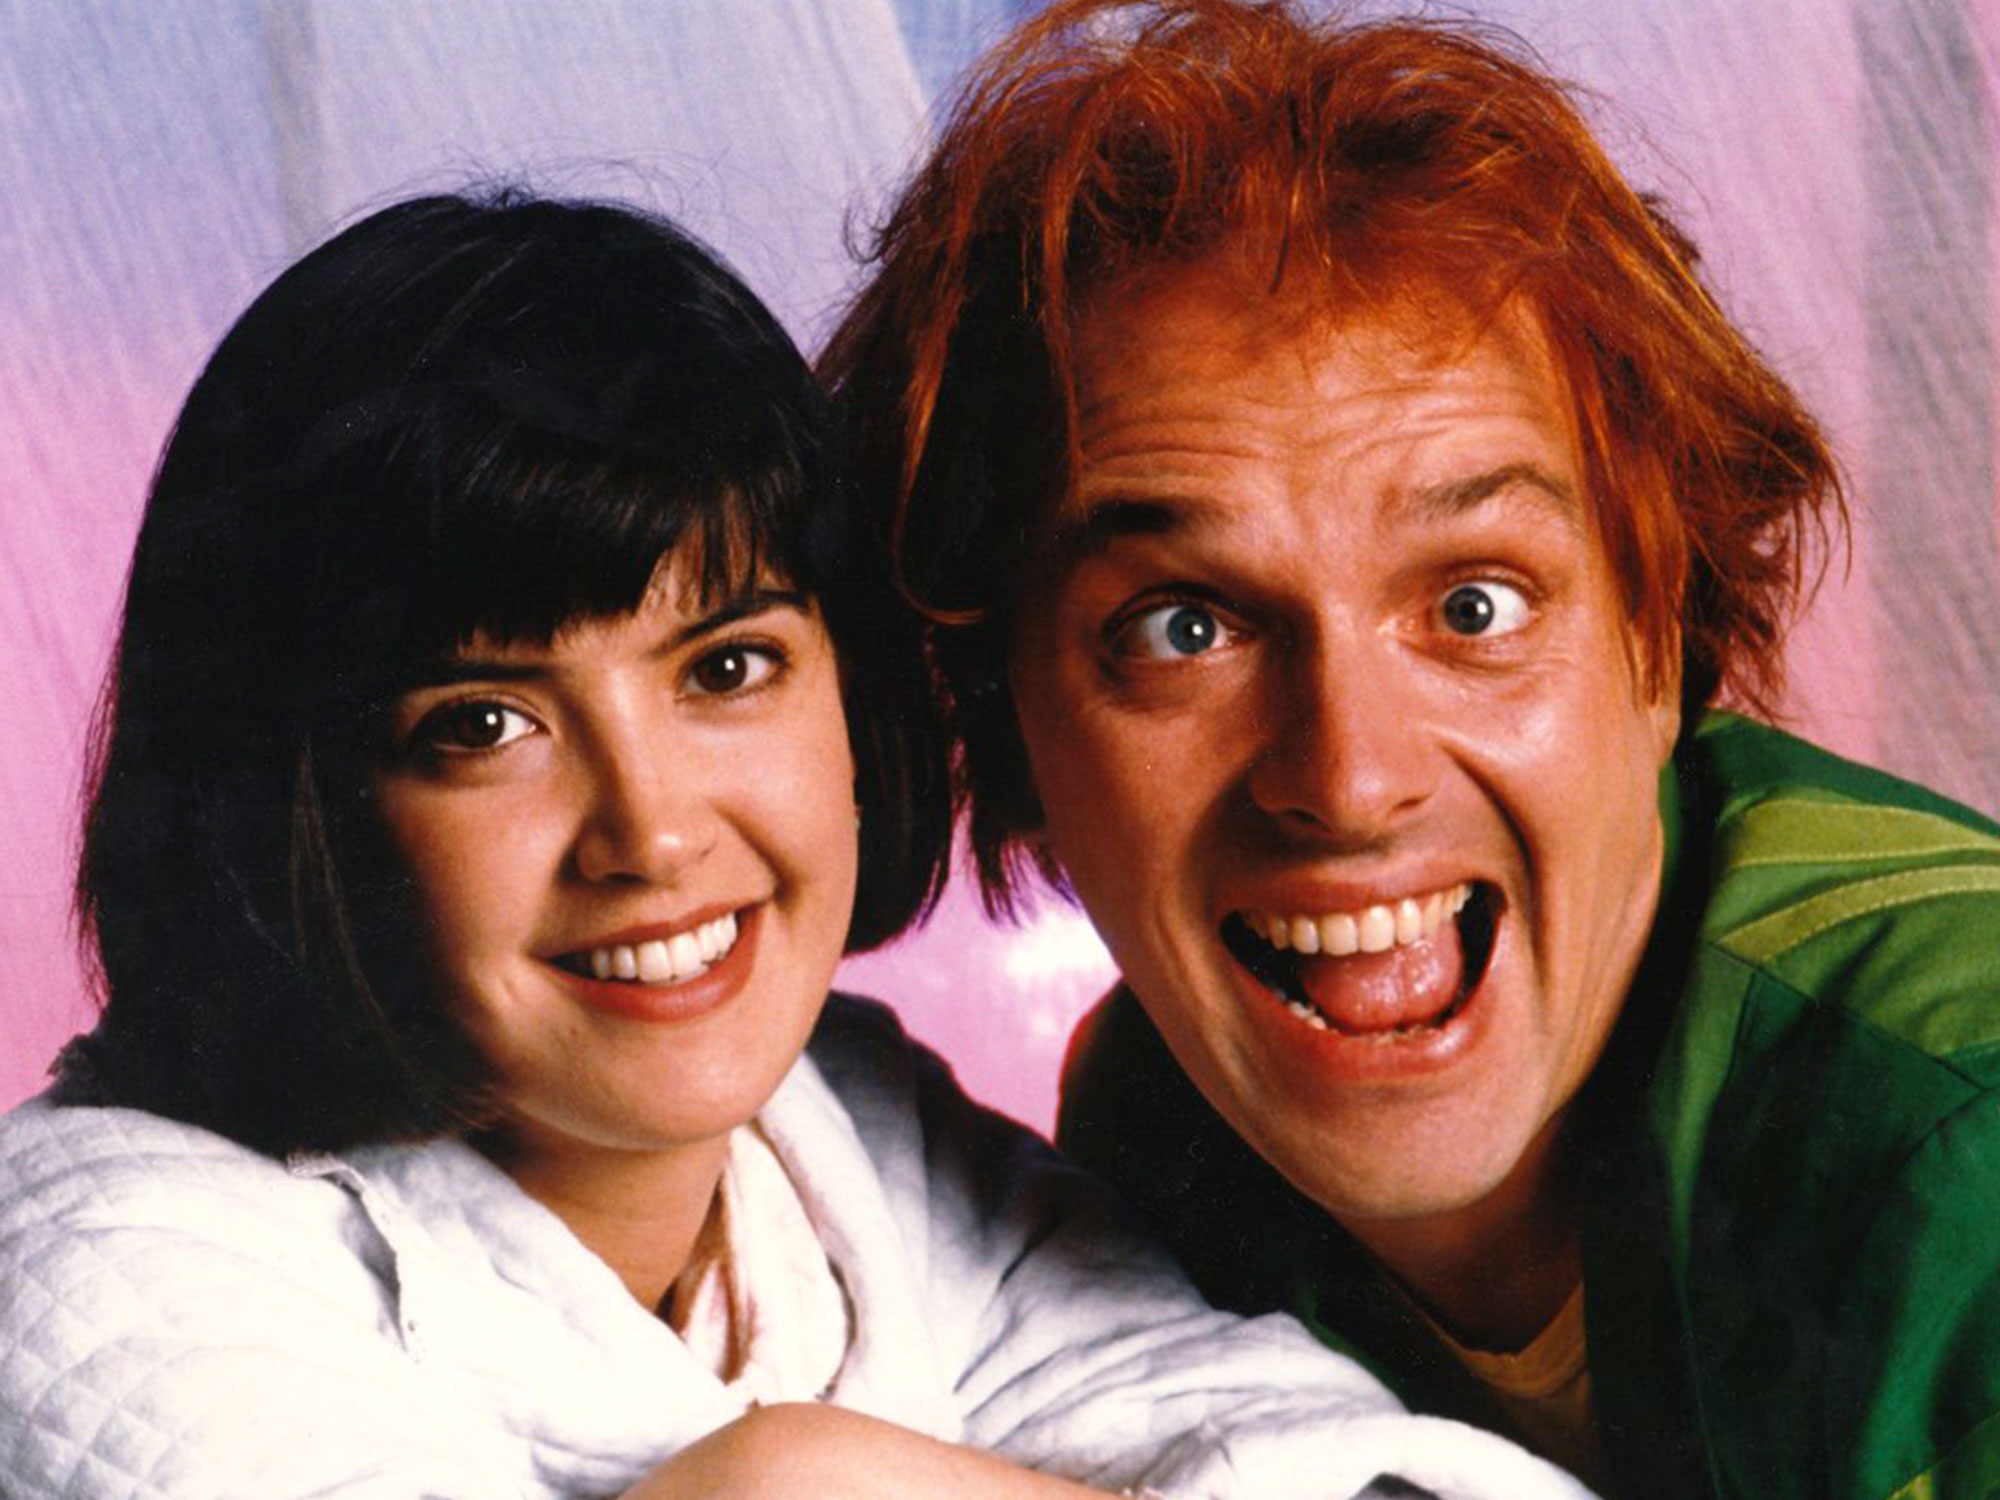 Poo jokes and a visit from Prince – The making of Drop Dead Fred